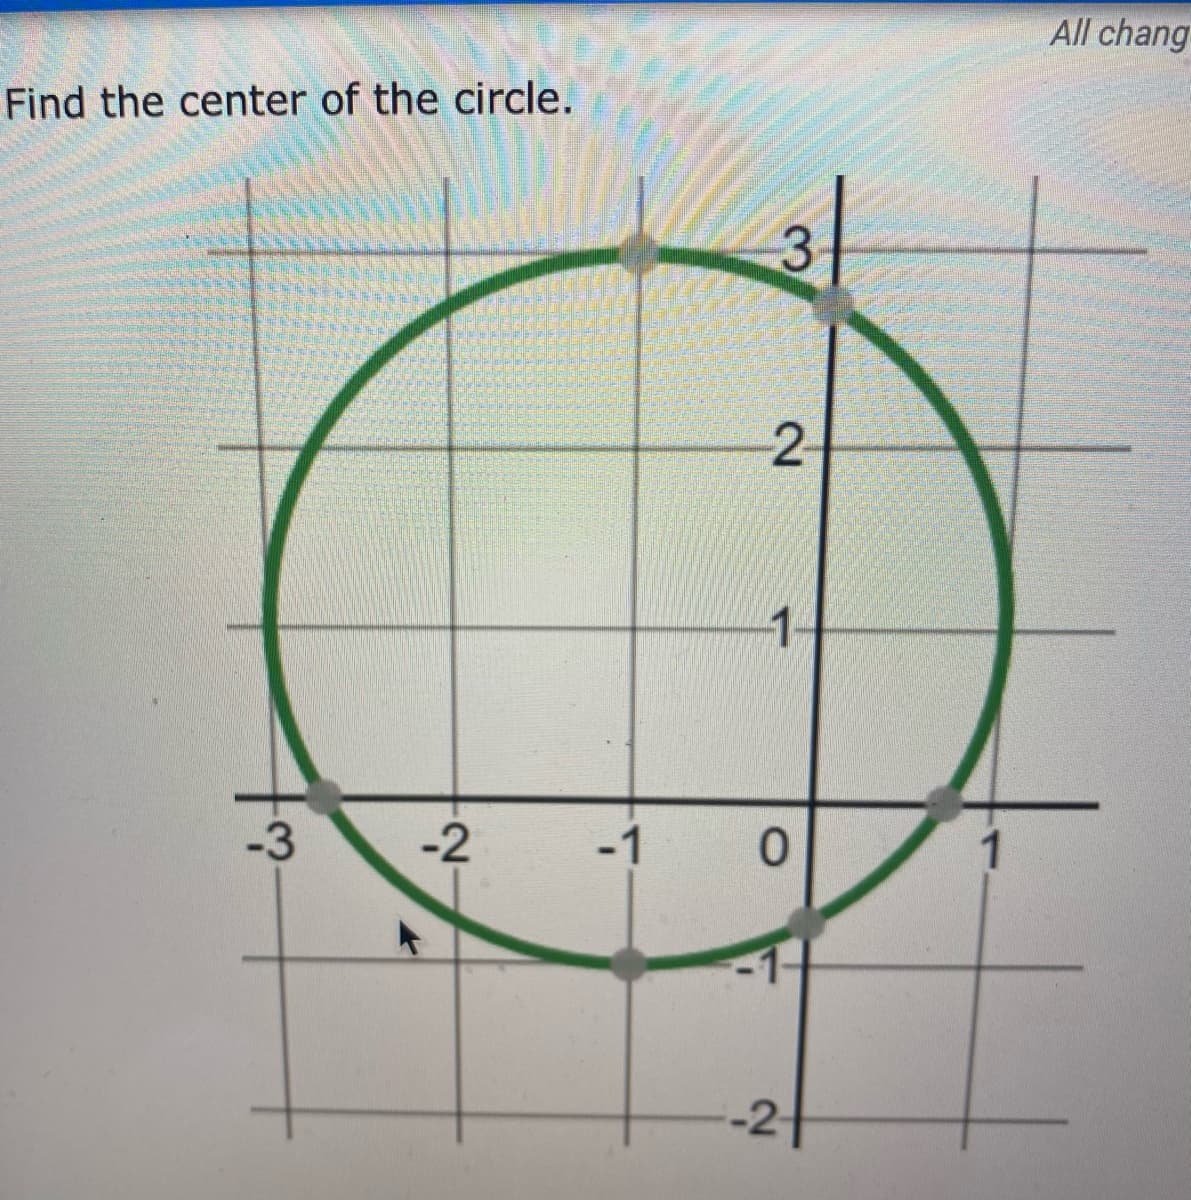 All chang
Find the center of the circle.
2-
1.
-3
-2
-1
1
-2
